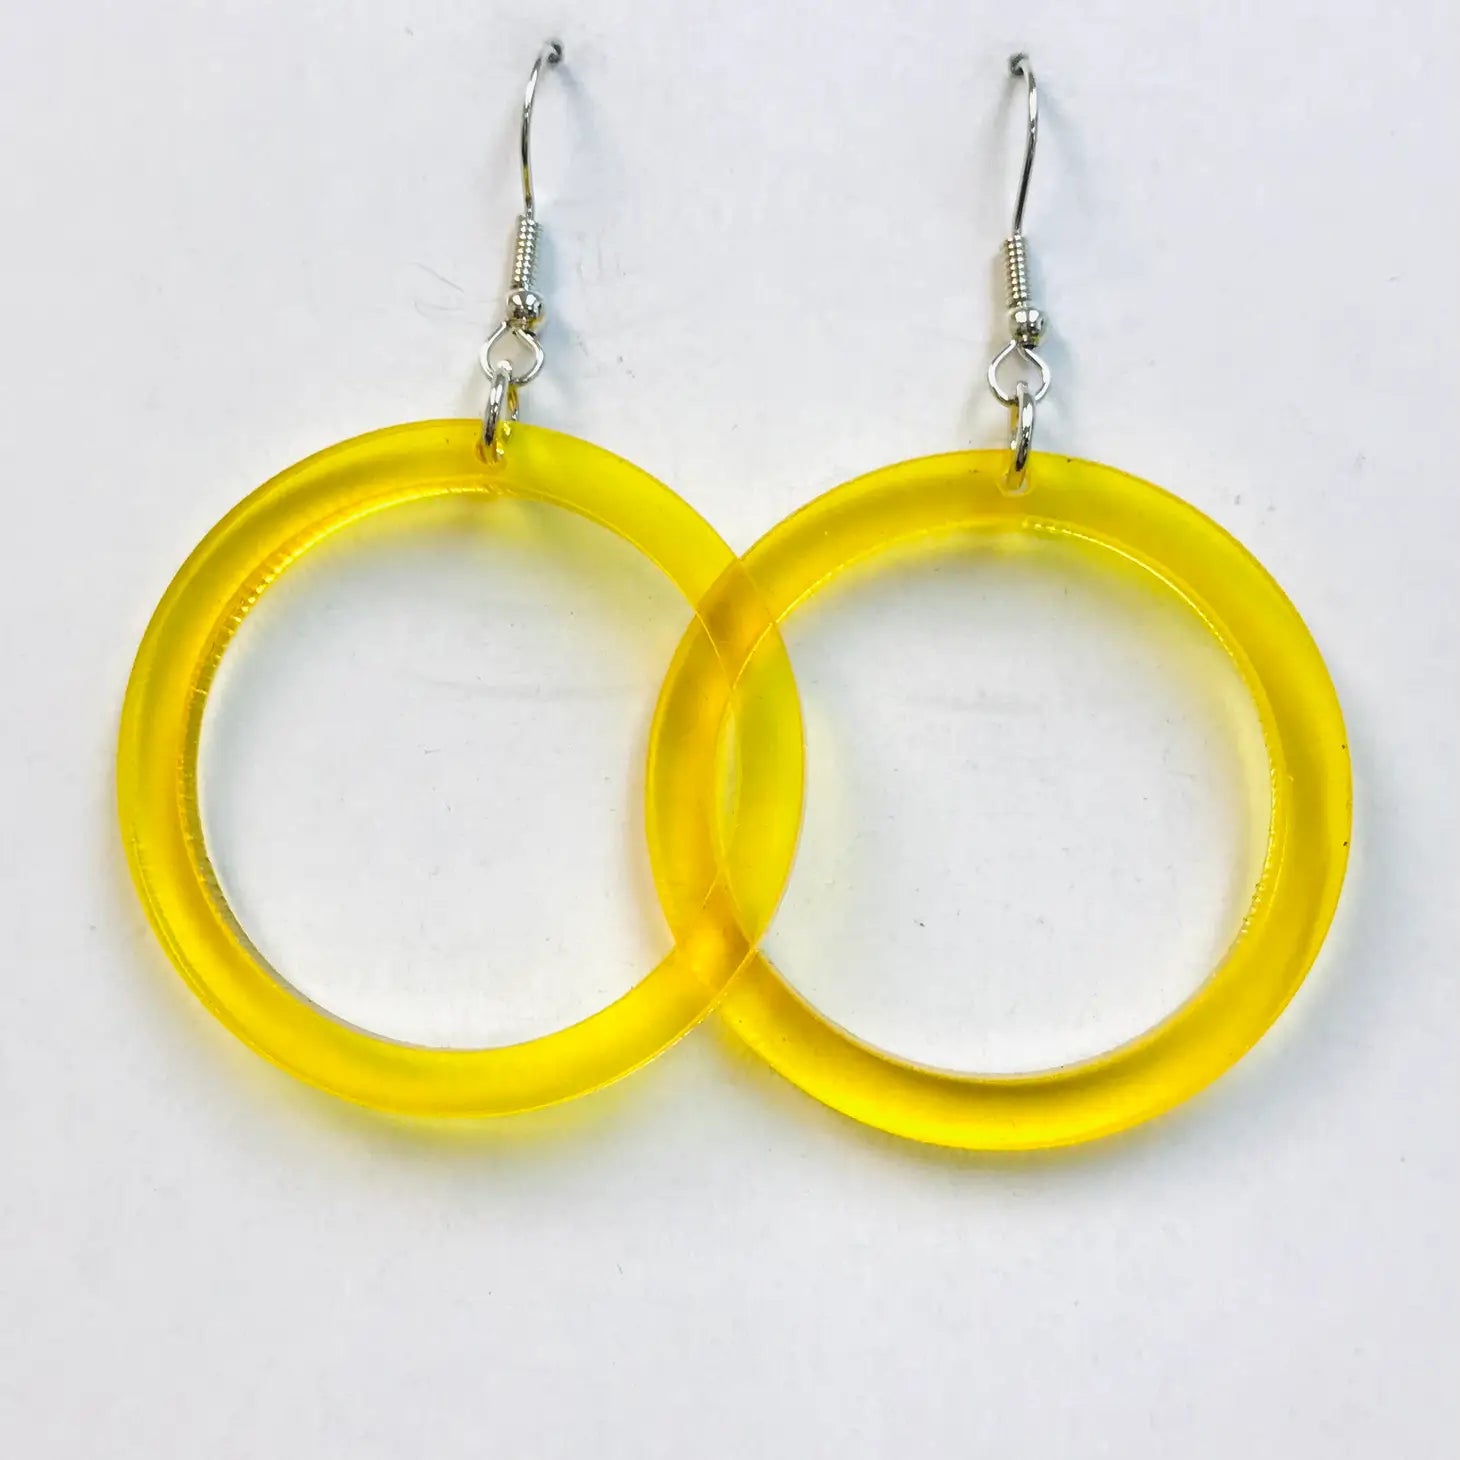 translucent acrylic drop hoop style earrings in a bright yellow color